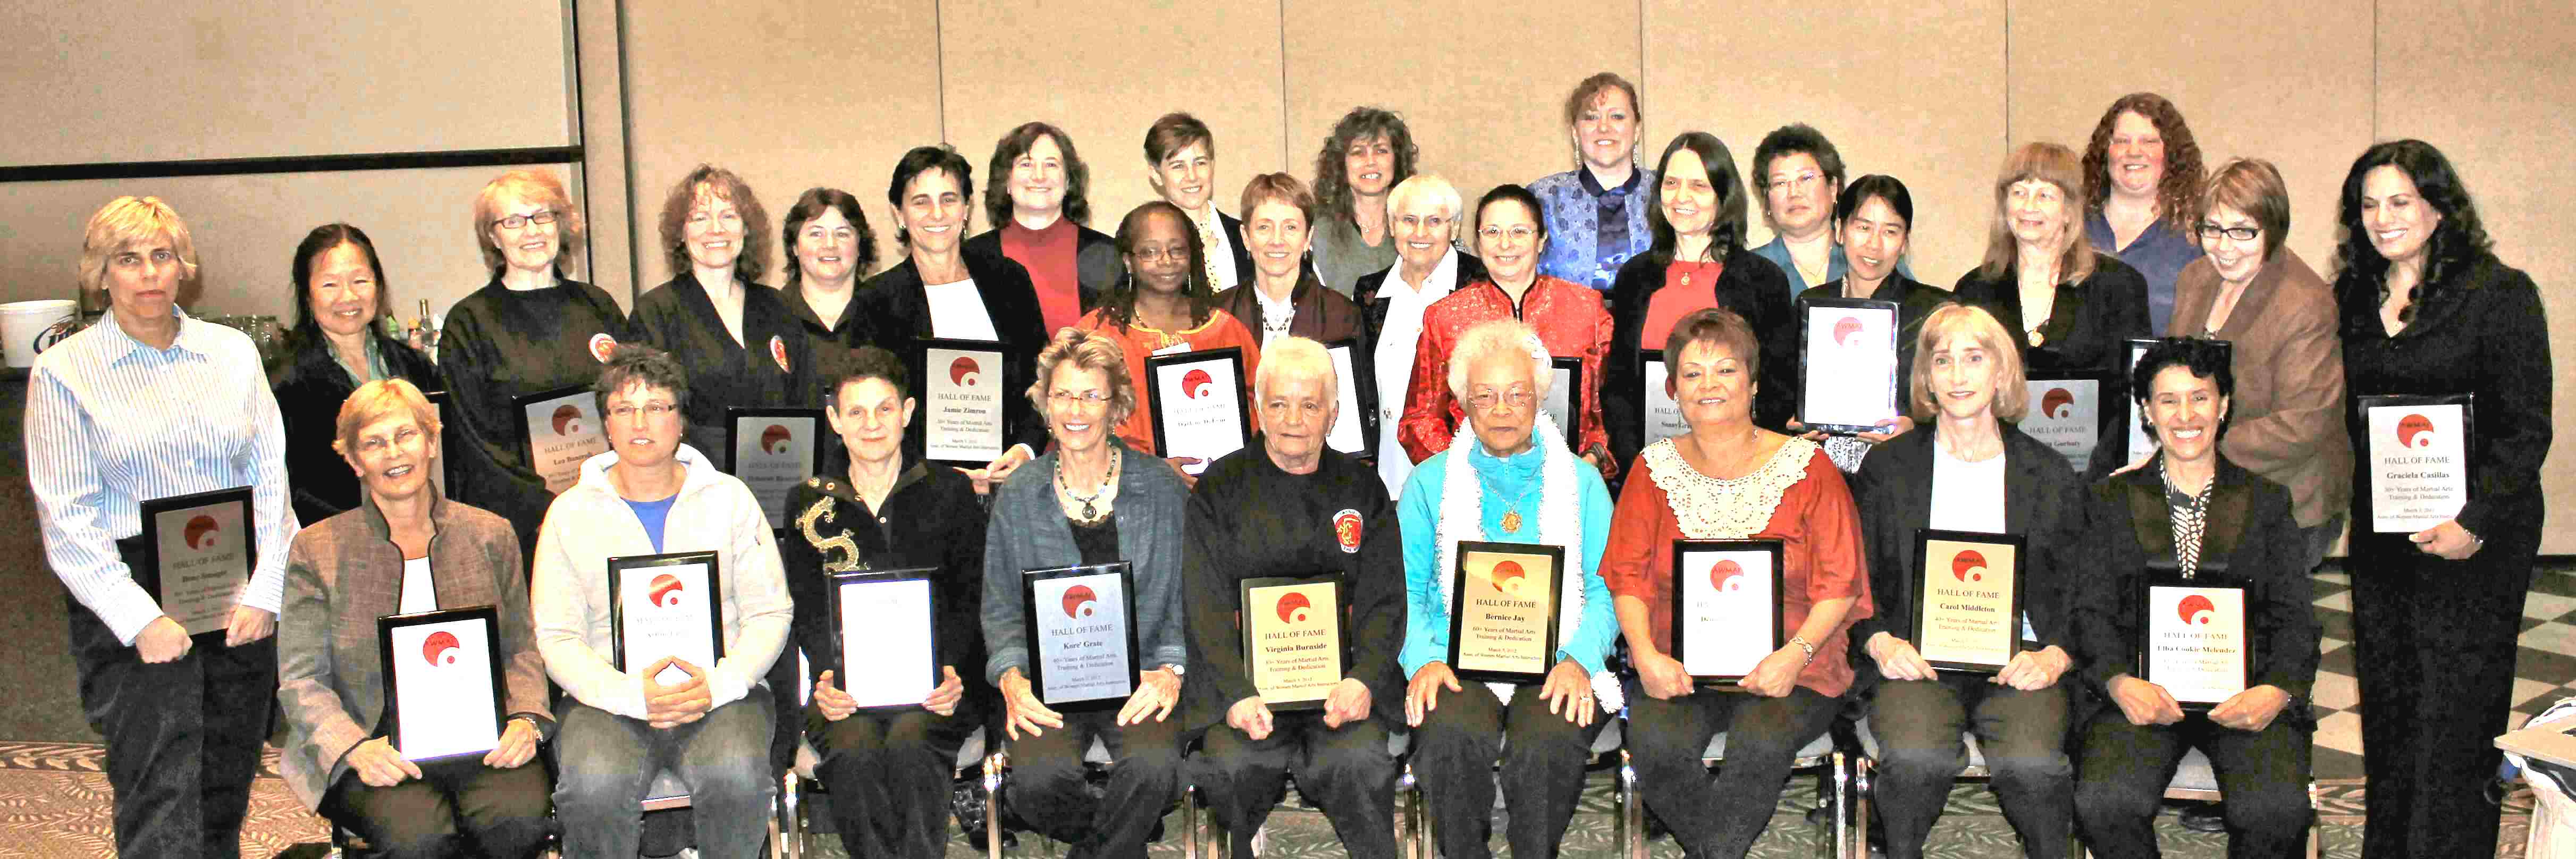 2012 AWMAI Hall of Fame recipients